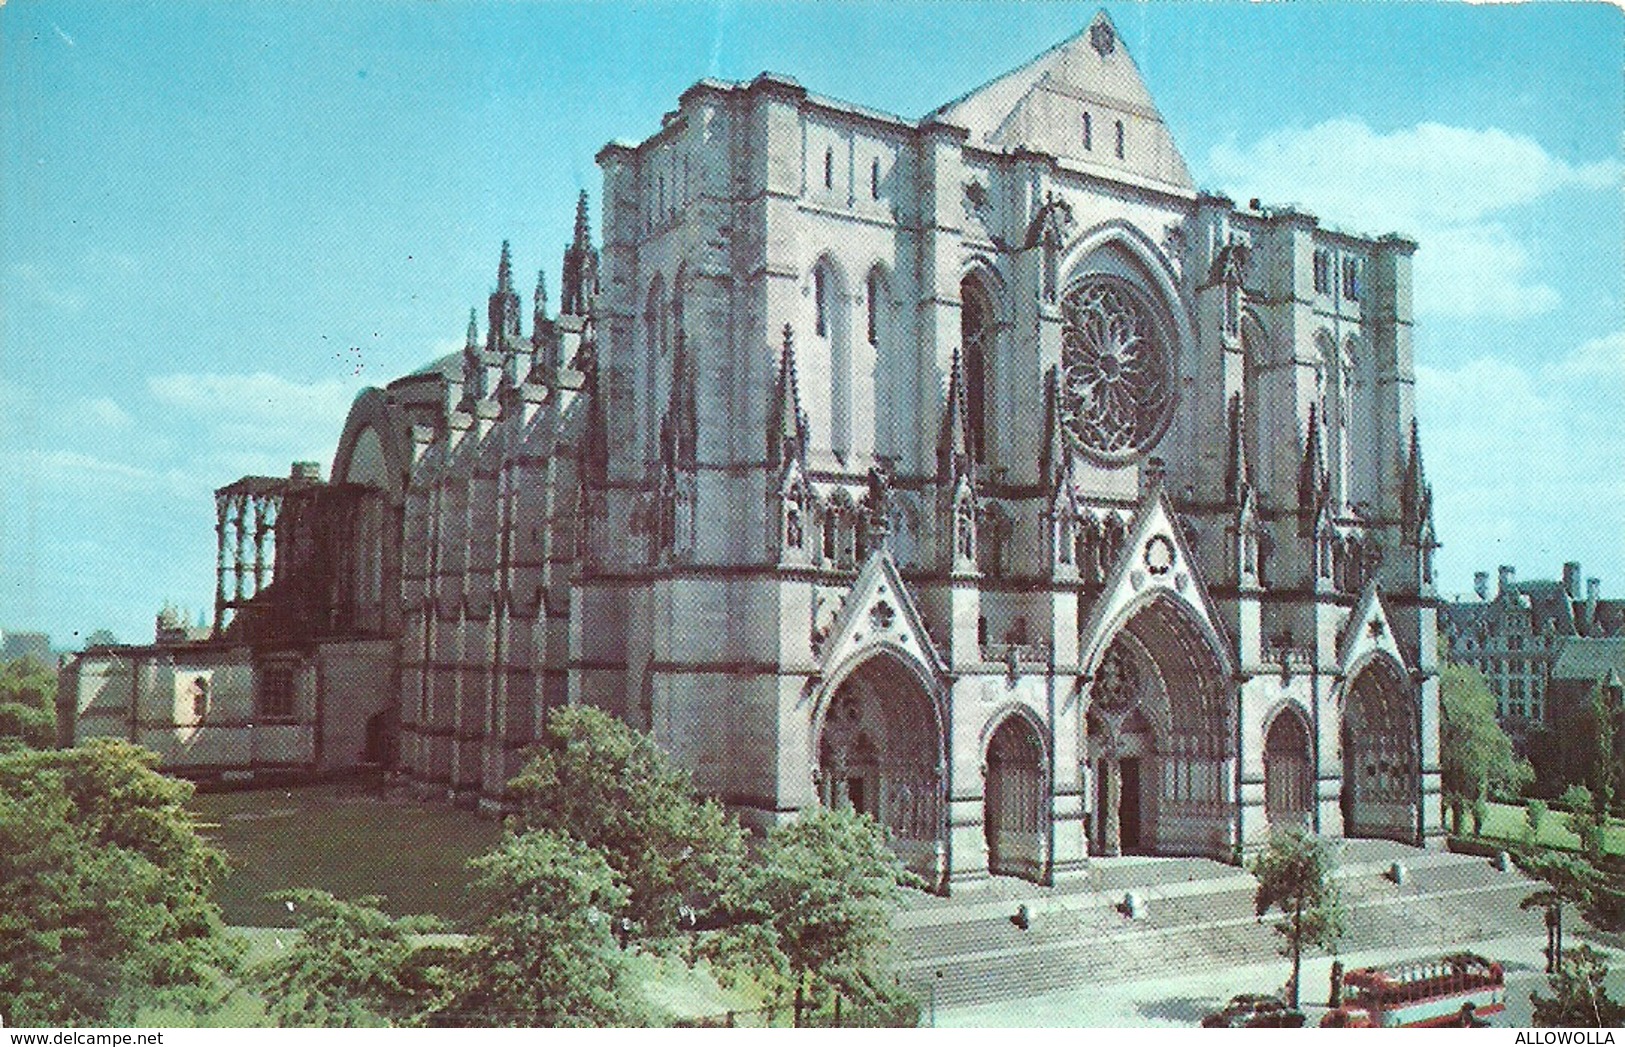 986 "THE CATHEDRAL OF ST. JOHN THE DIVINE- N.Y.  " CARTOLINA POSTALE ORIG.  NON SPED. - Kerken